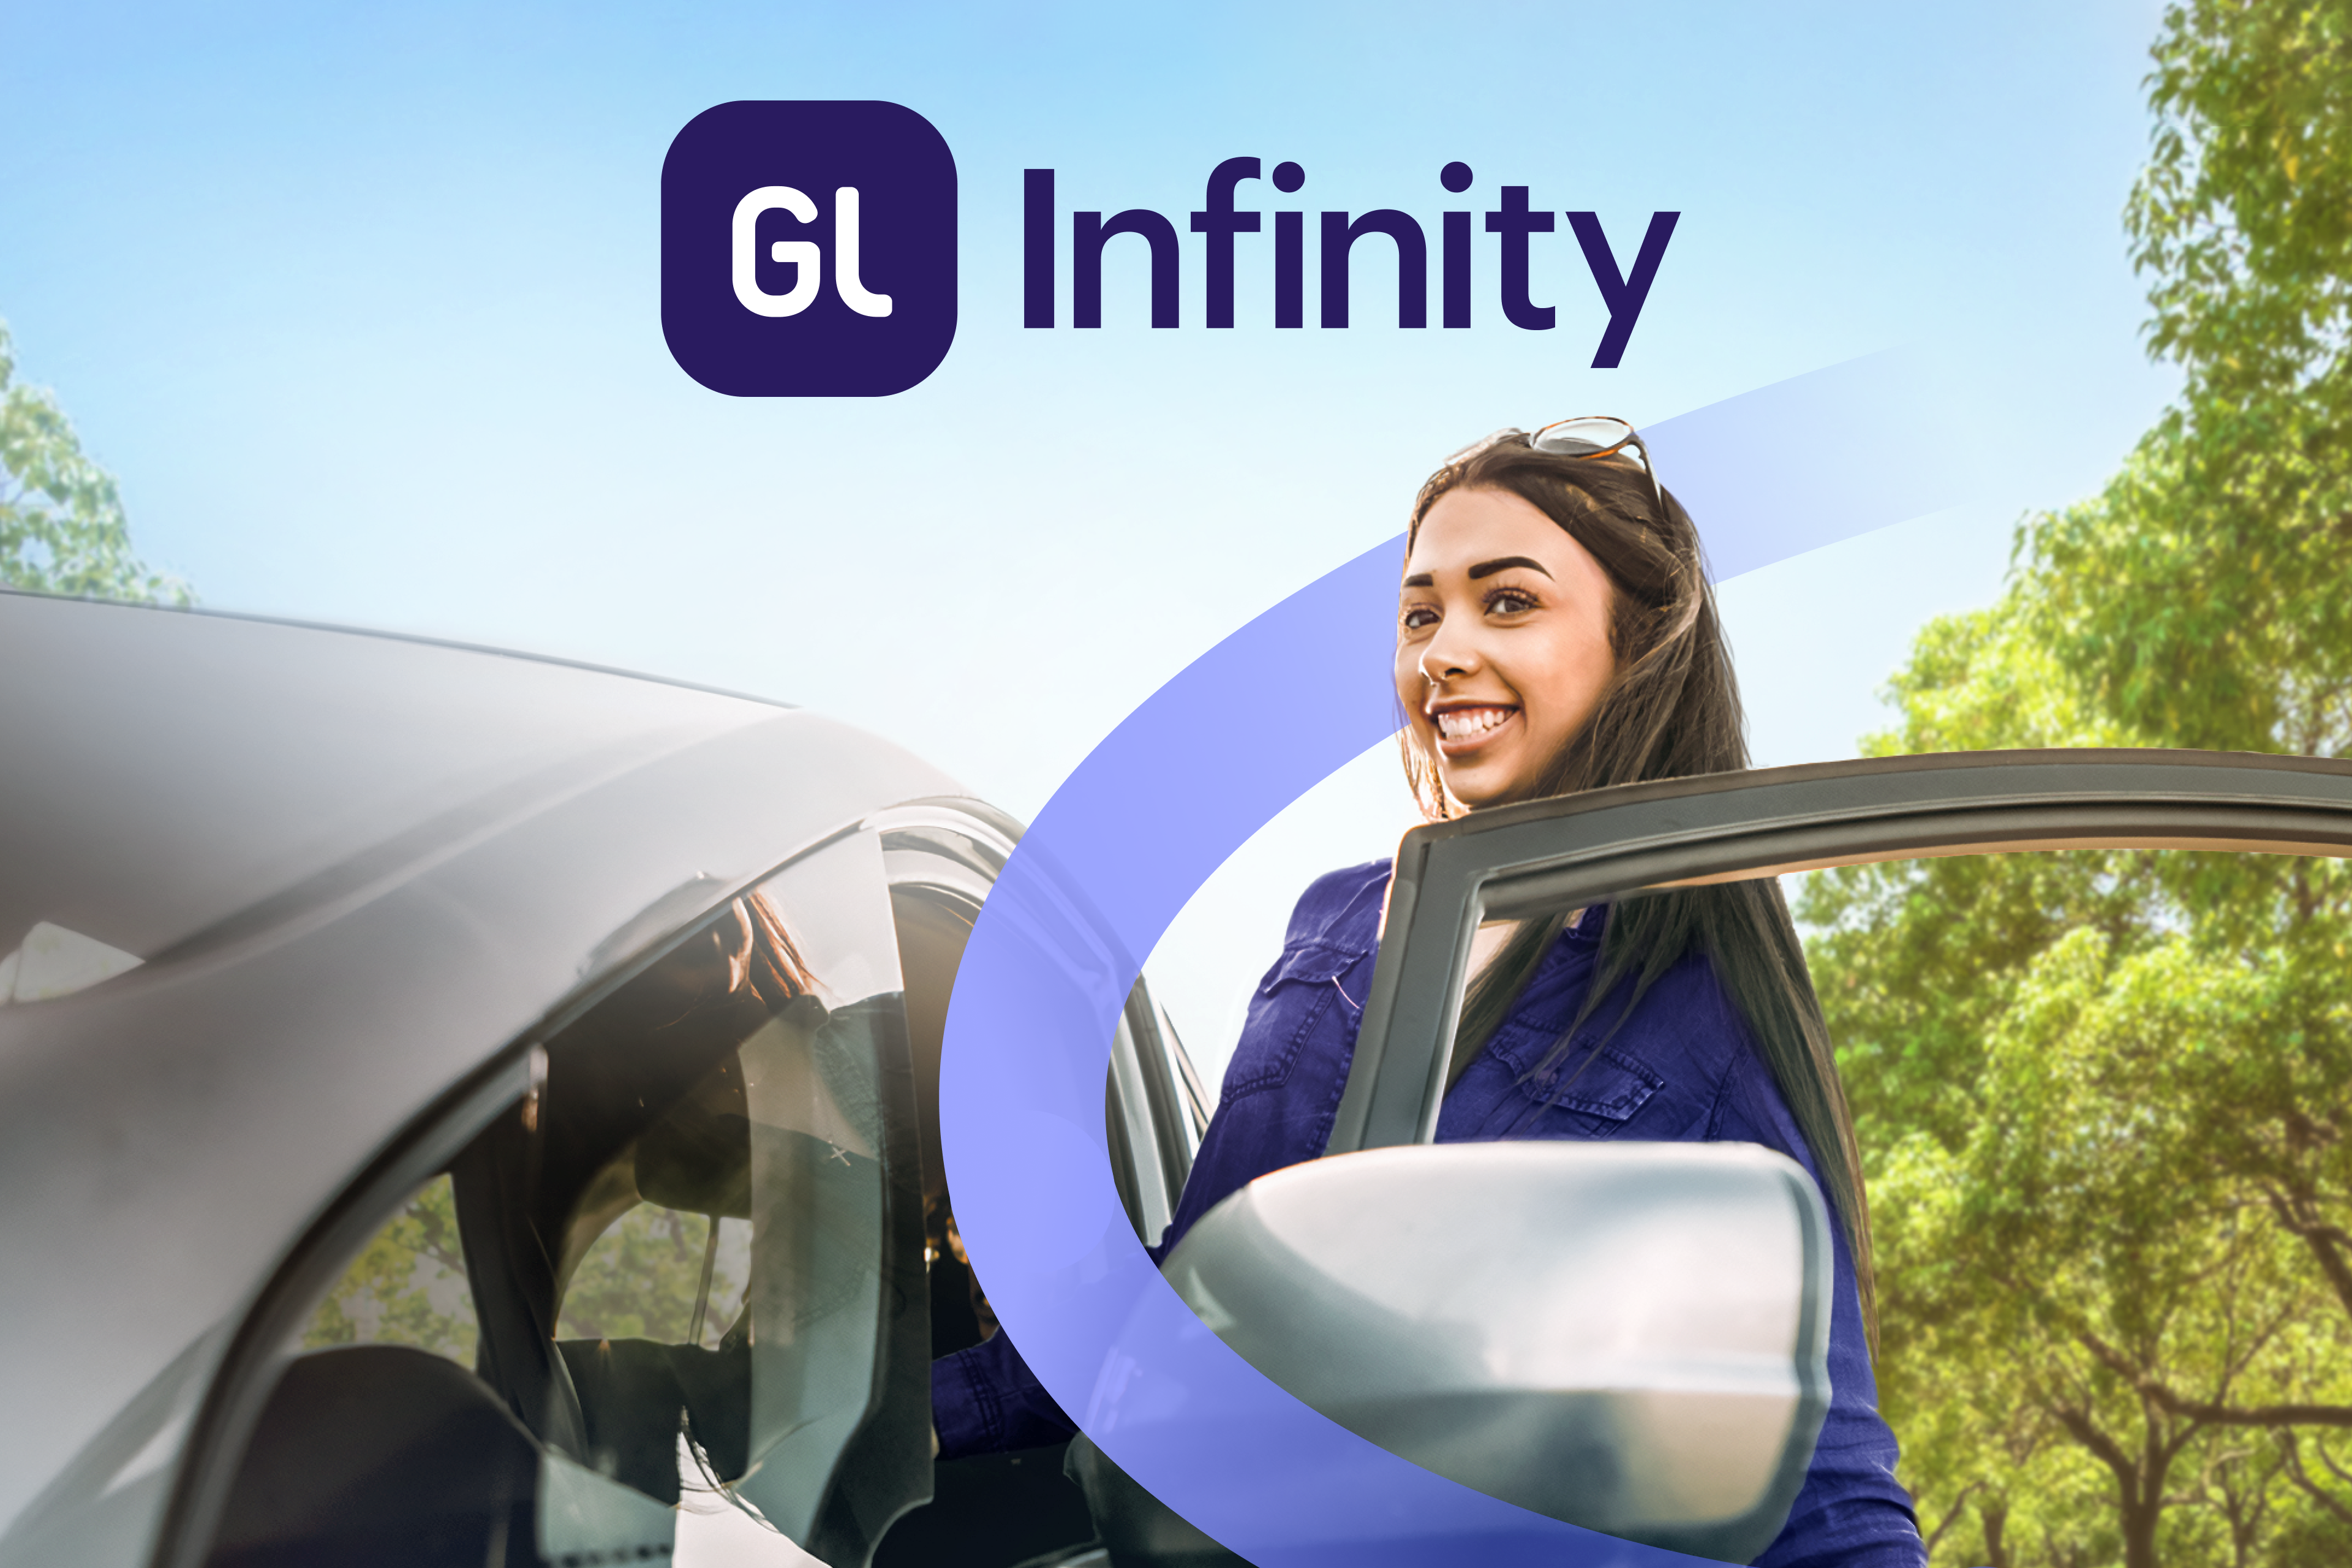 A teen girl getting into a car promoting the new Greenlight Infinity plan and safety features